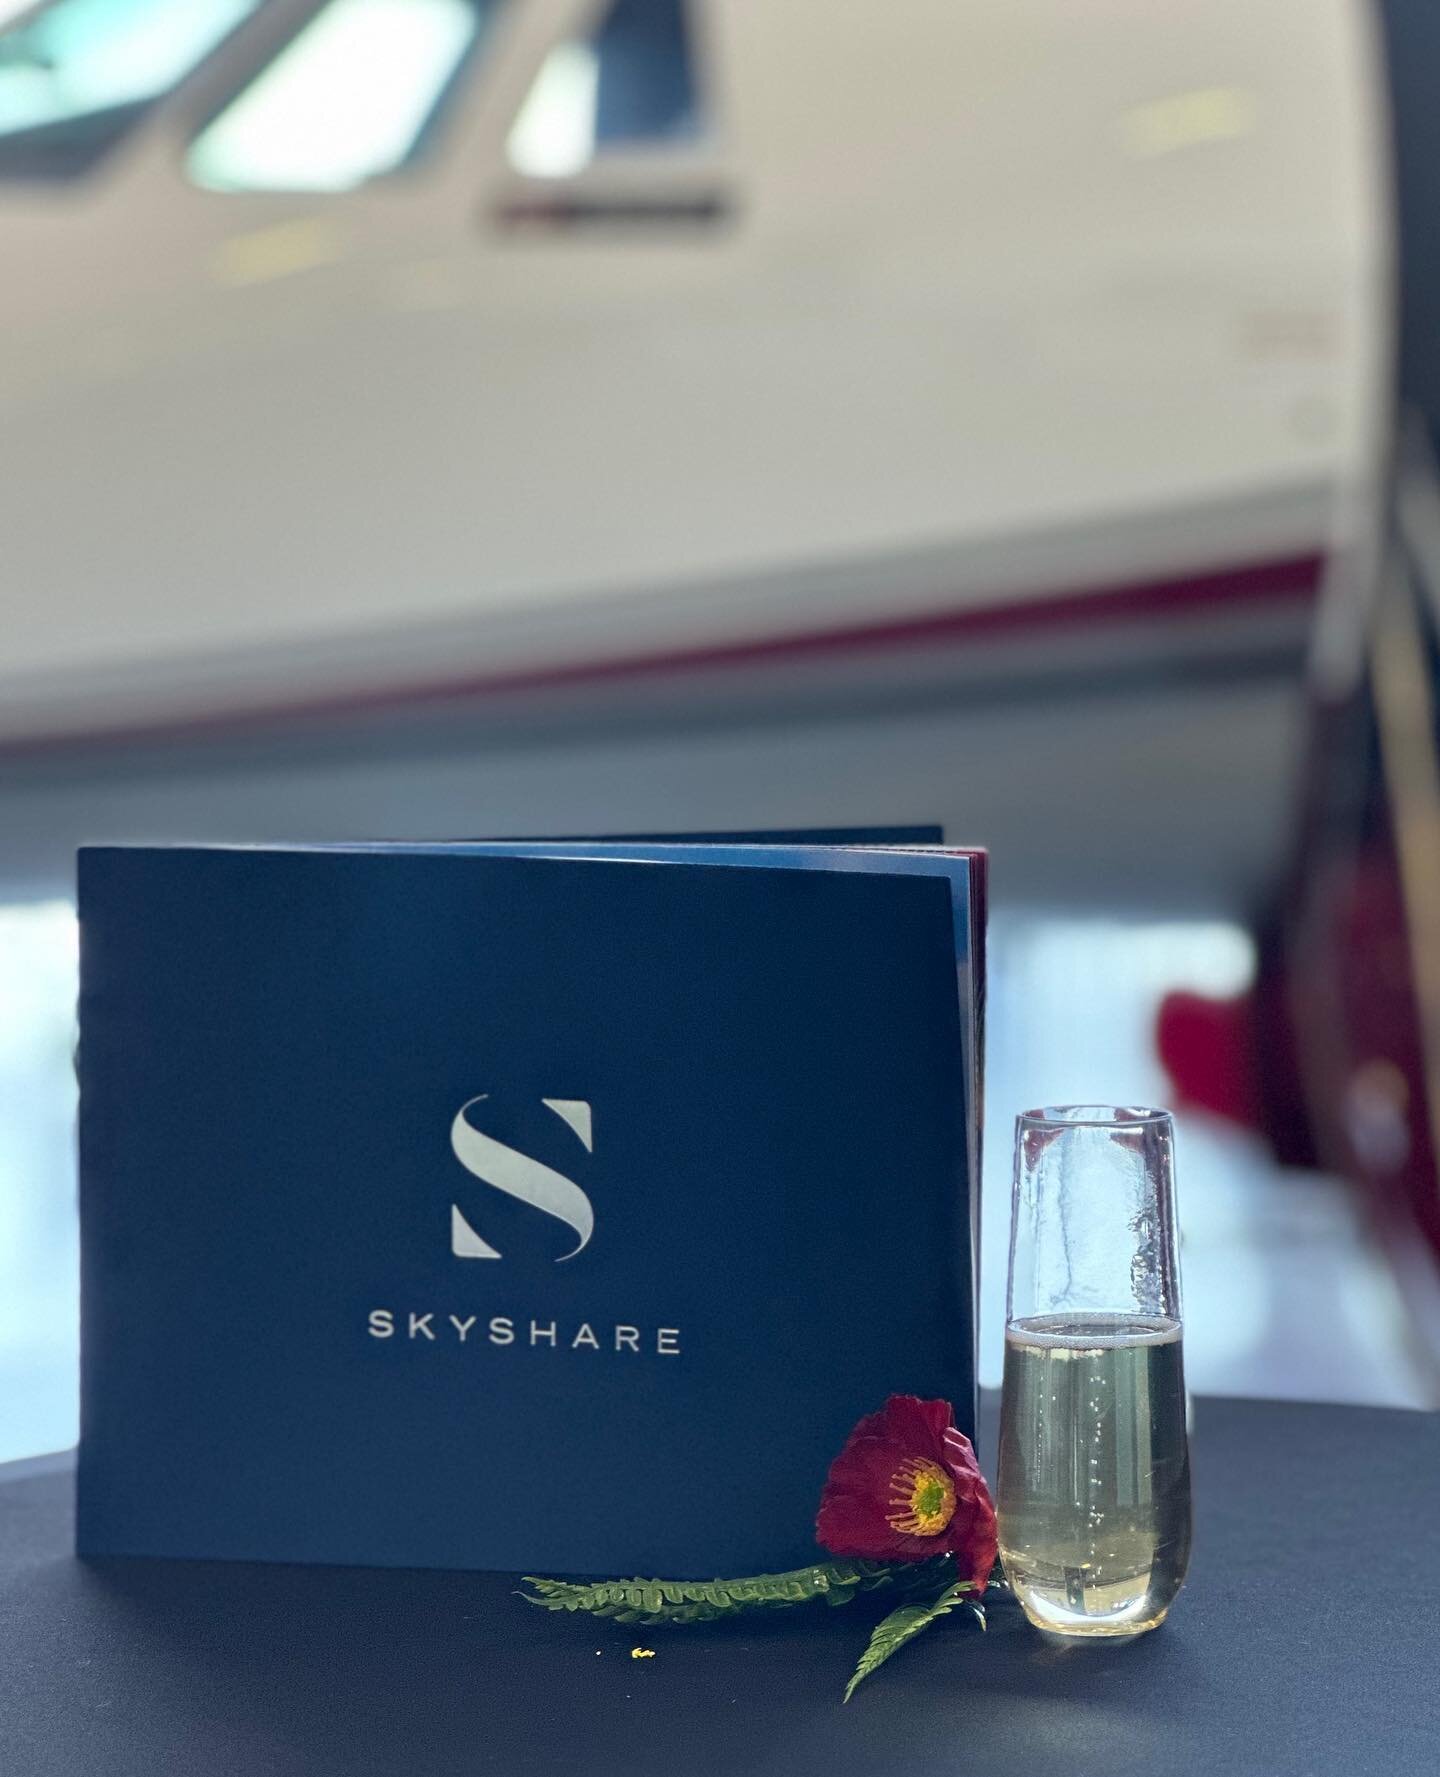 The Top Shelf Bartenders took flight at Jett Aviation Scottsdale for @cbskyshare new logo unveiling 🛩️ We had a team of 4 bartenders and greeted everyone with champagne service 🥂

Hundreds of guests attended the party, along with these badass jets 